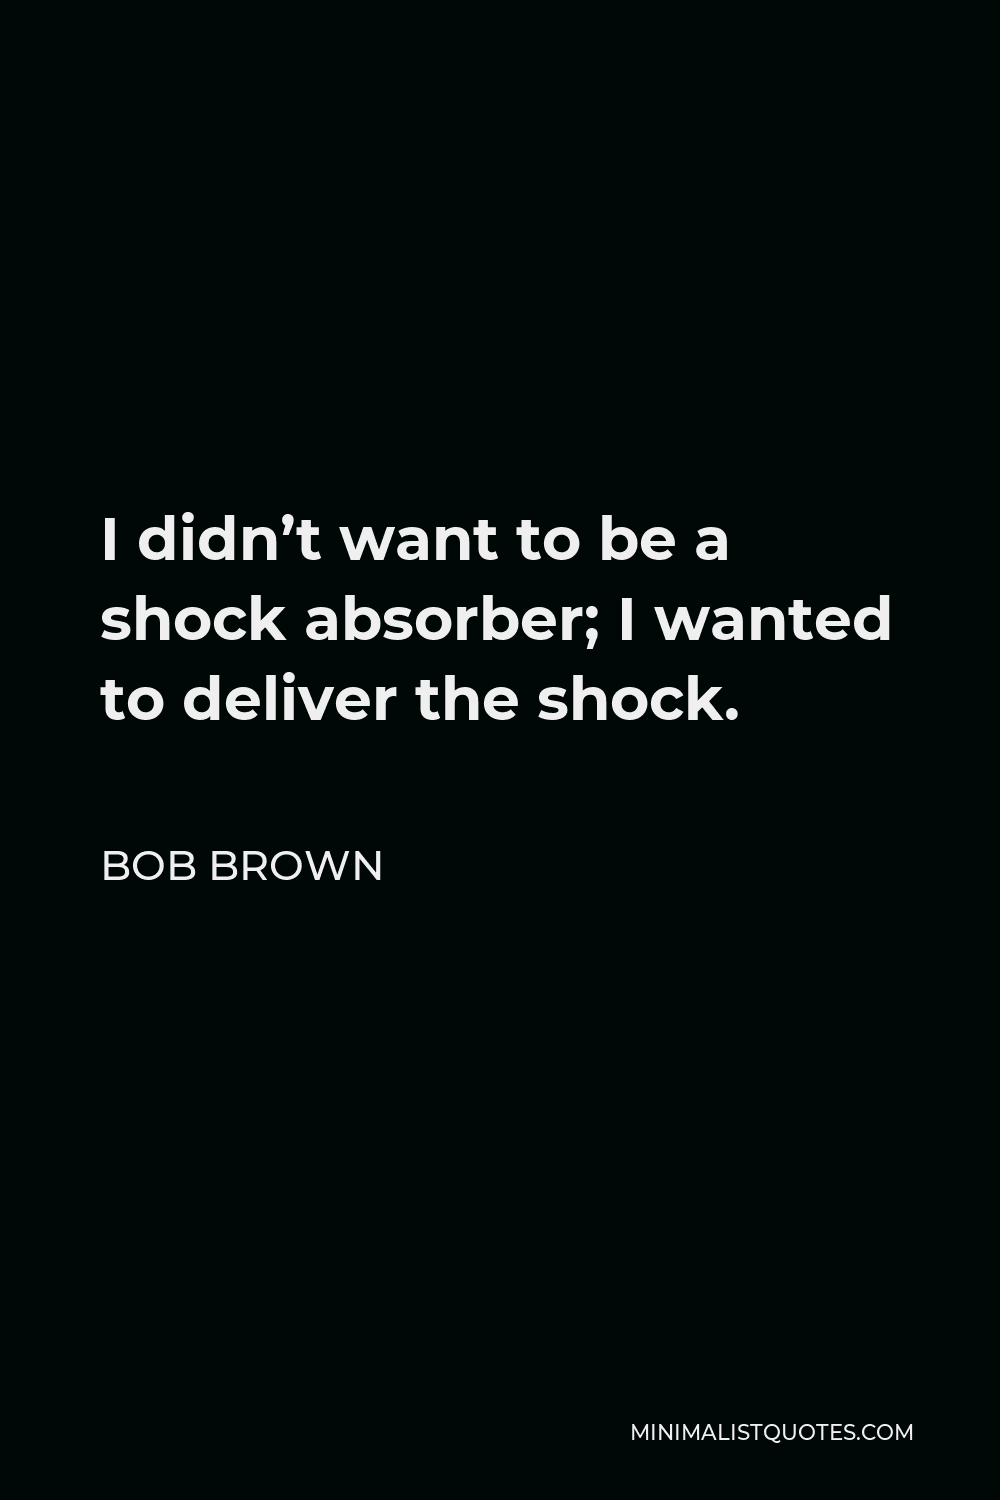 Bob Brown Quote - I didn’t want to be a shock absorber; I wanted to deliver the shock.